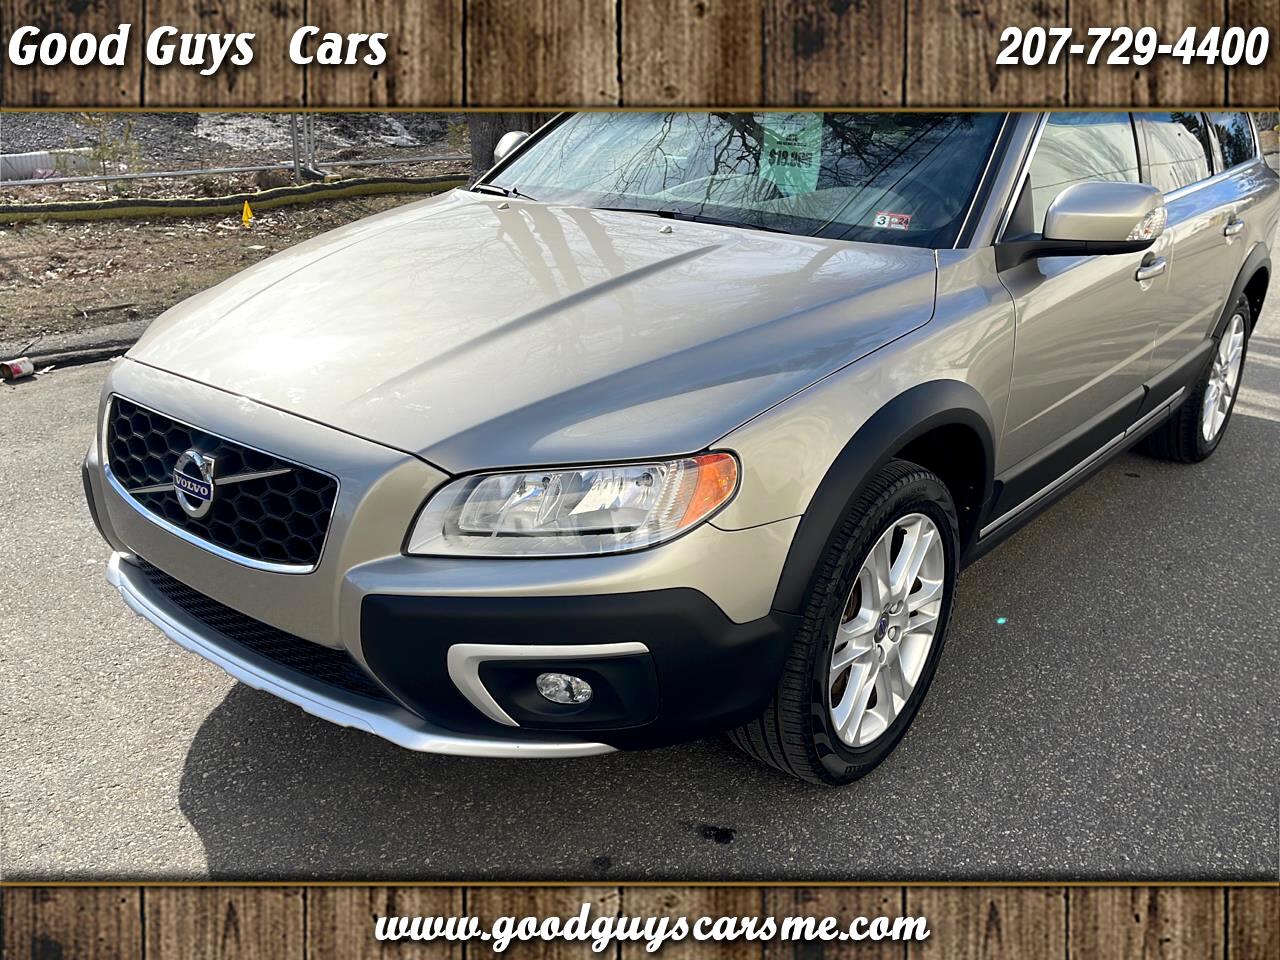 Used 2016 Volvo XC70 AWD 4dr Wgn T5 Premier for Sale in Topsham ME 04086  Good Guys Used Cars